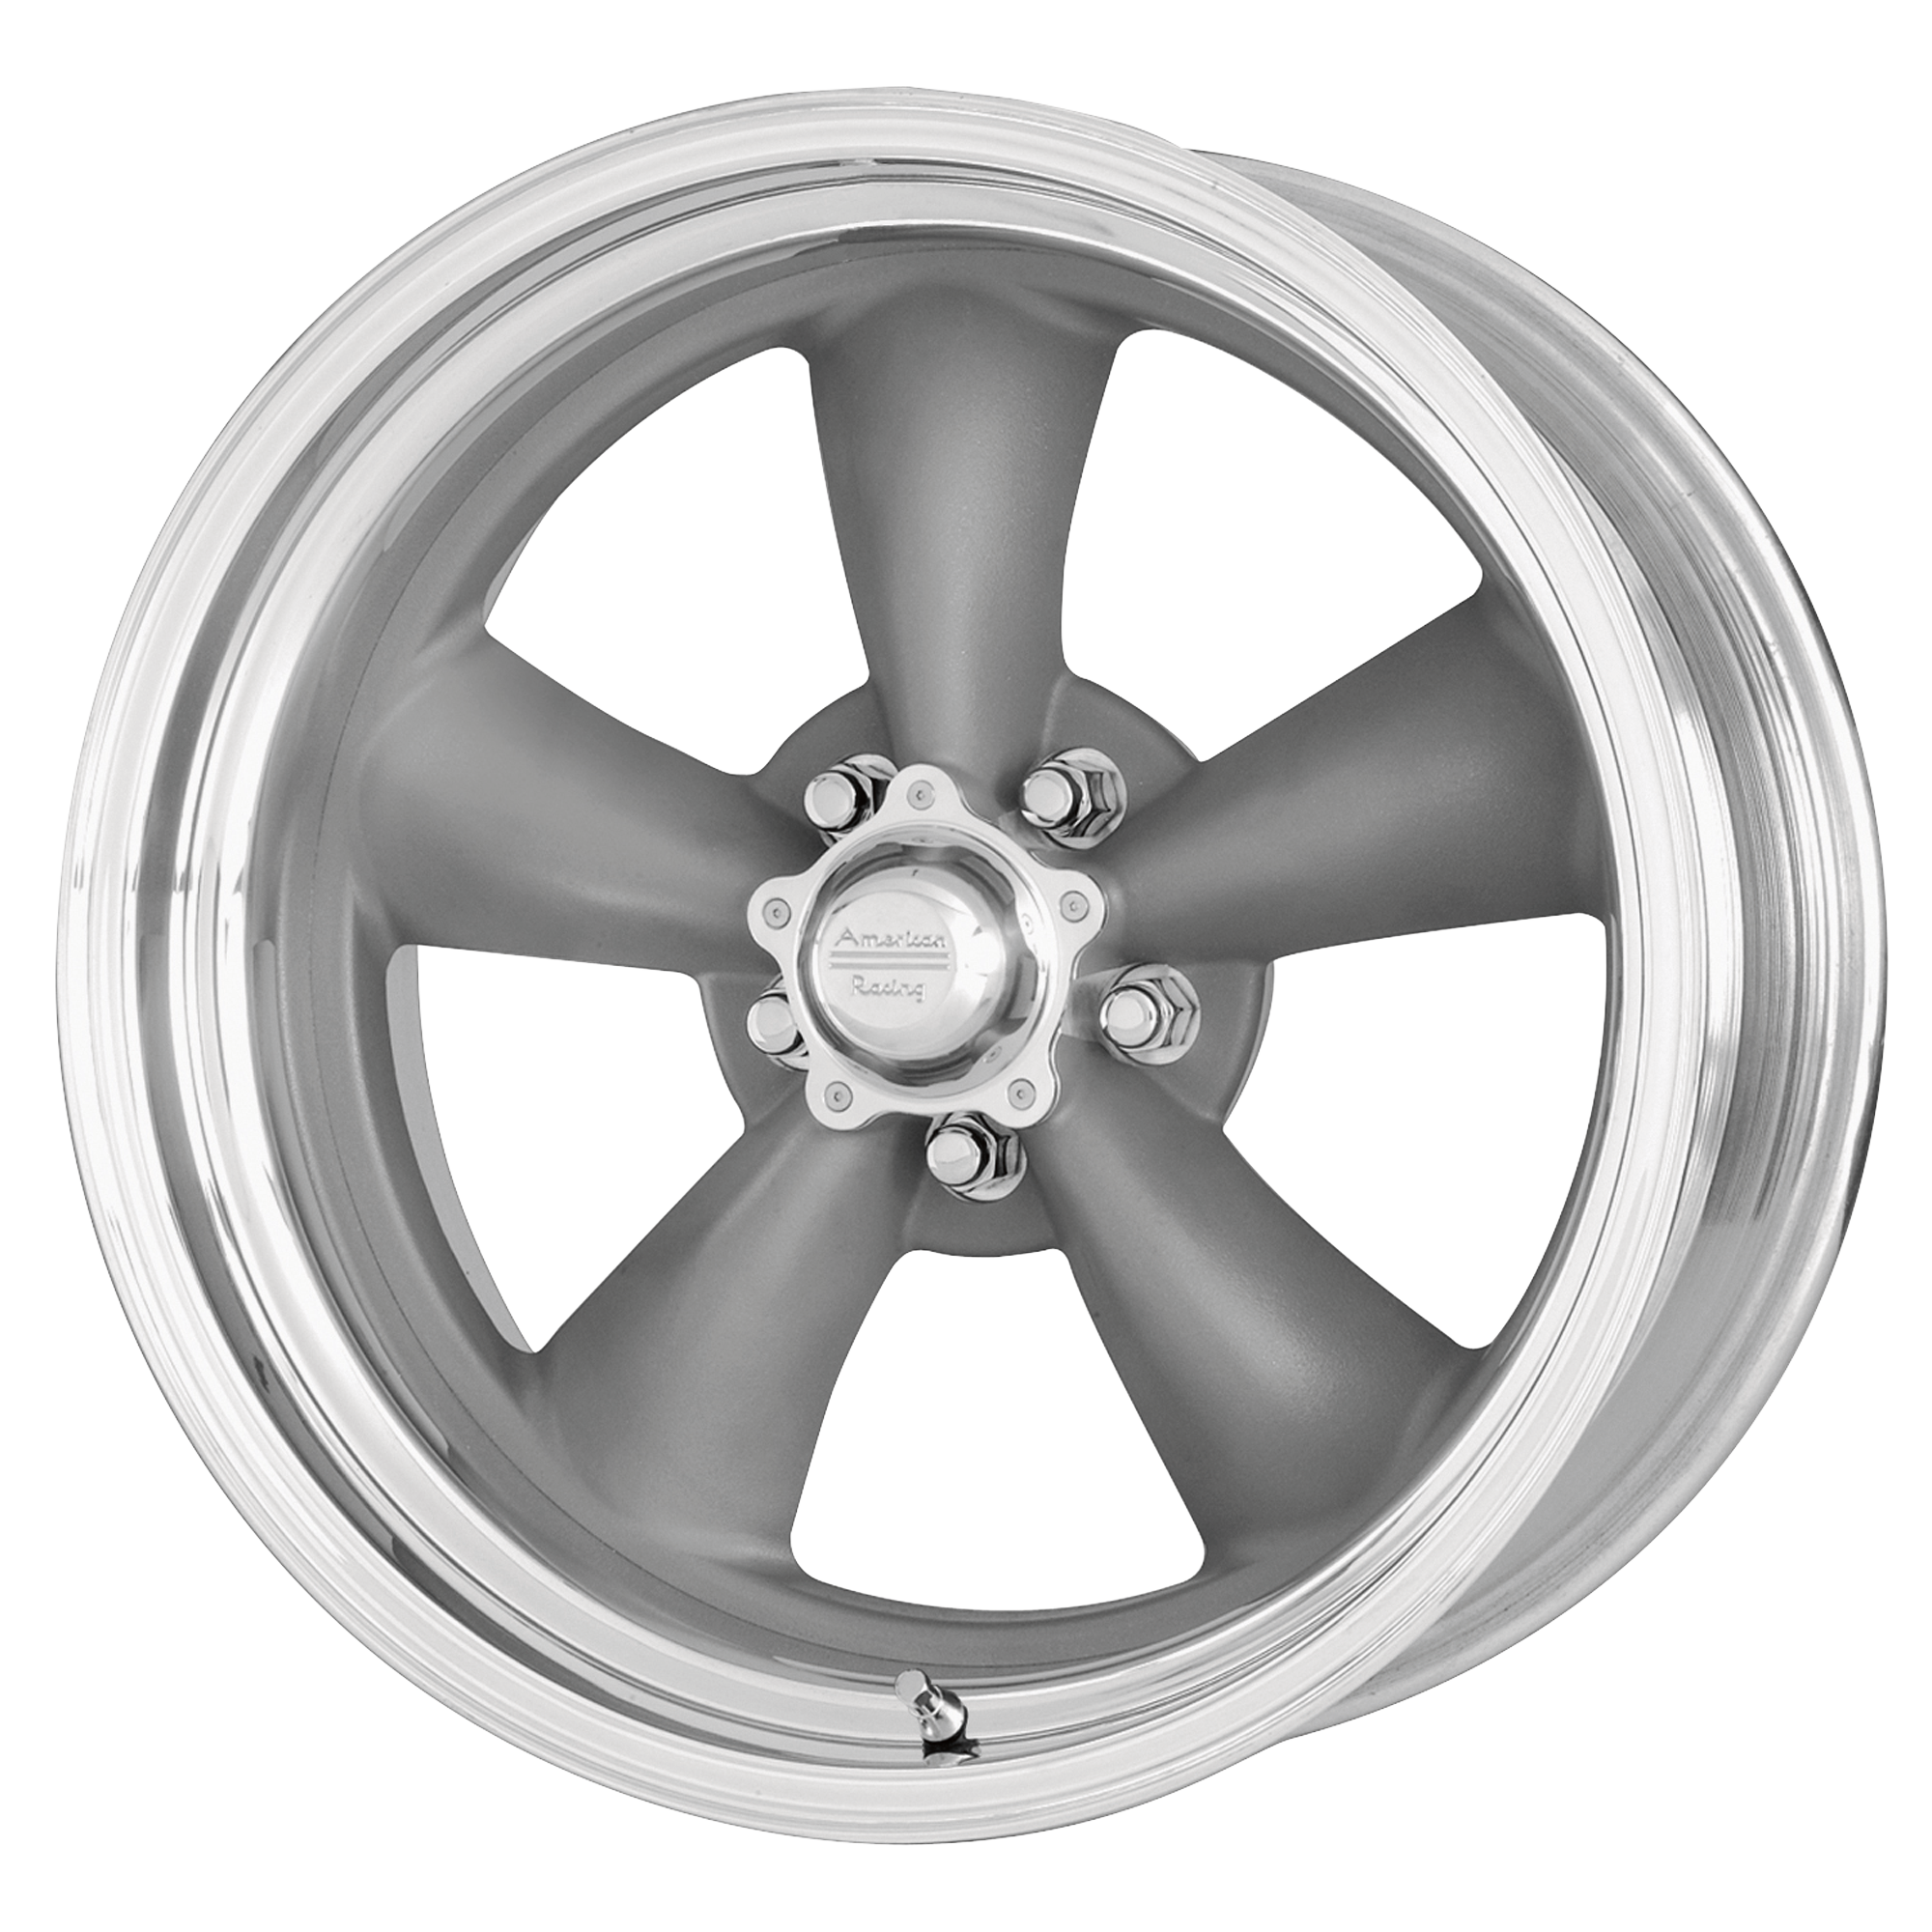 CLASSIC TORQ THRUST II ONE PIECE 18x8 5x114.30 MAG GRAY W/ MACHINED LIP (0 mm) - Tires and Engine Performance